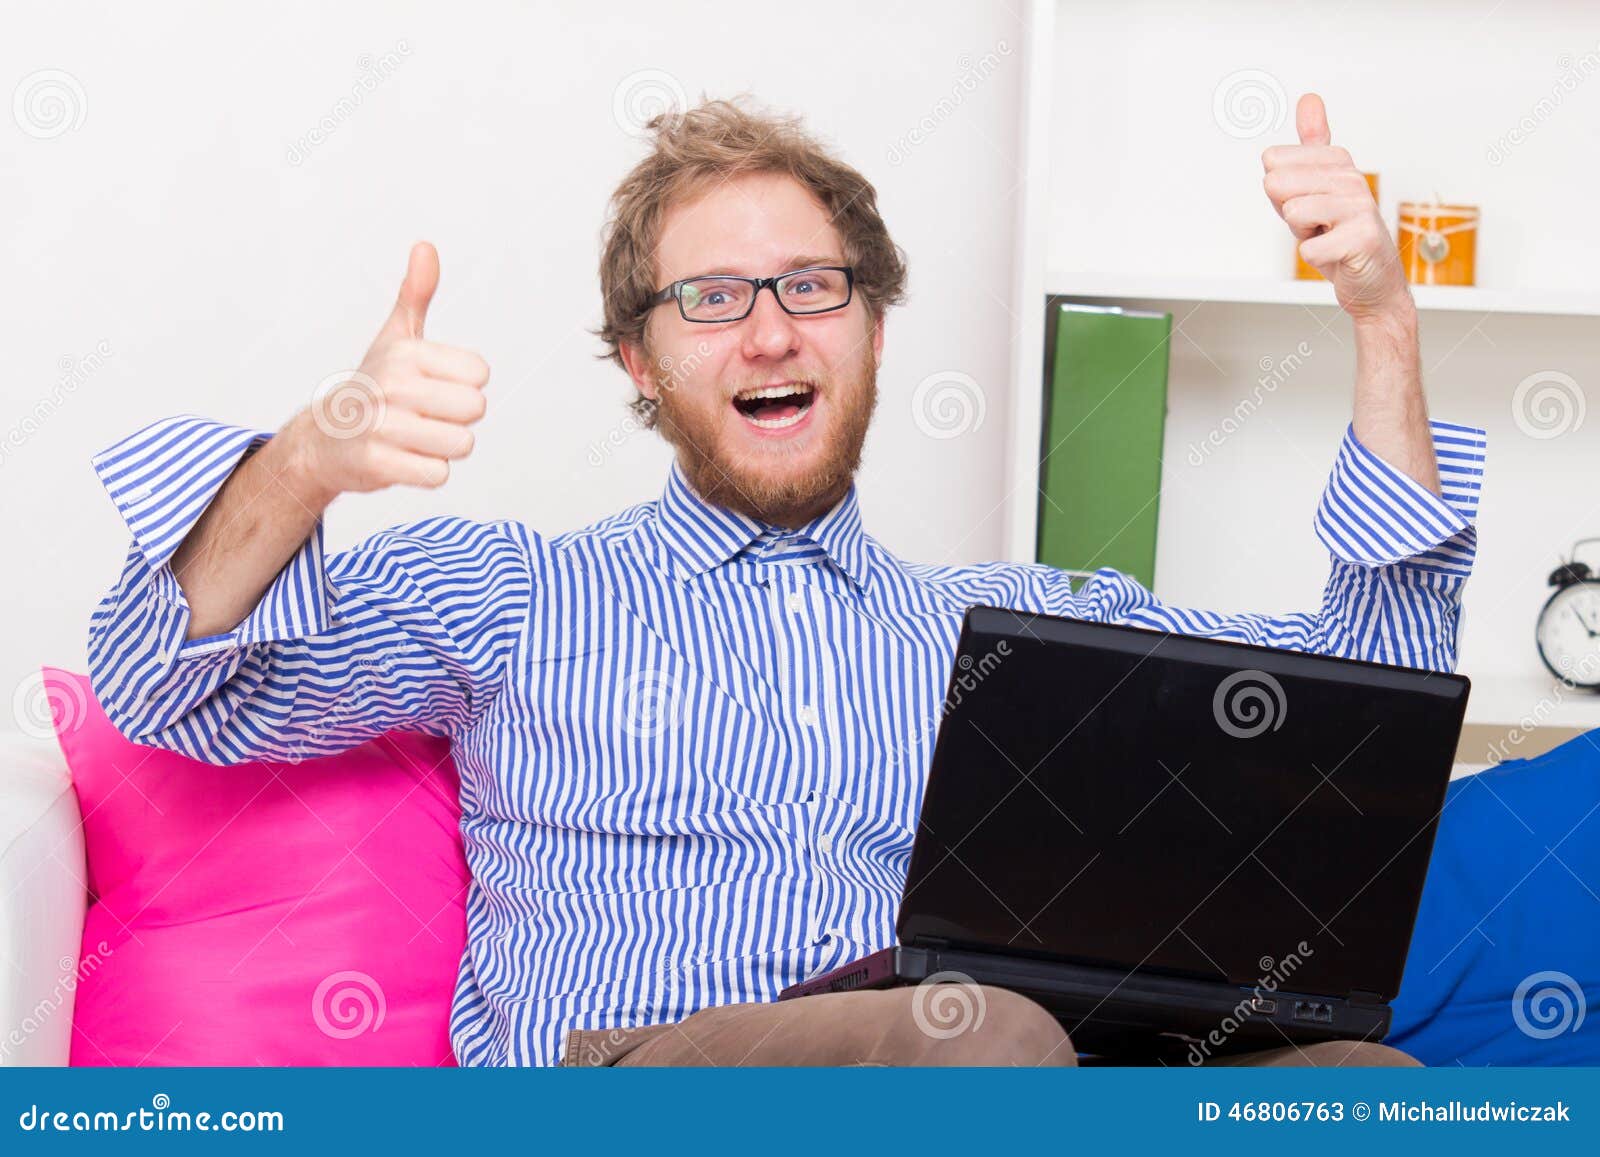 happy man shows ok sign in front of a computer